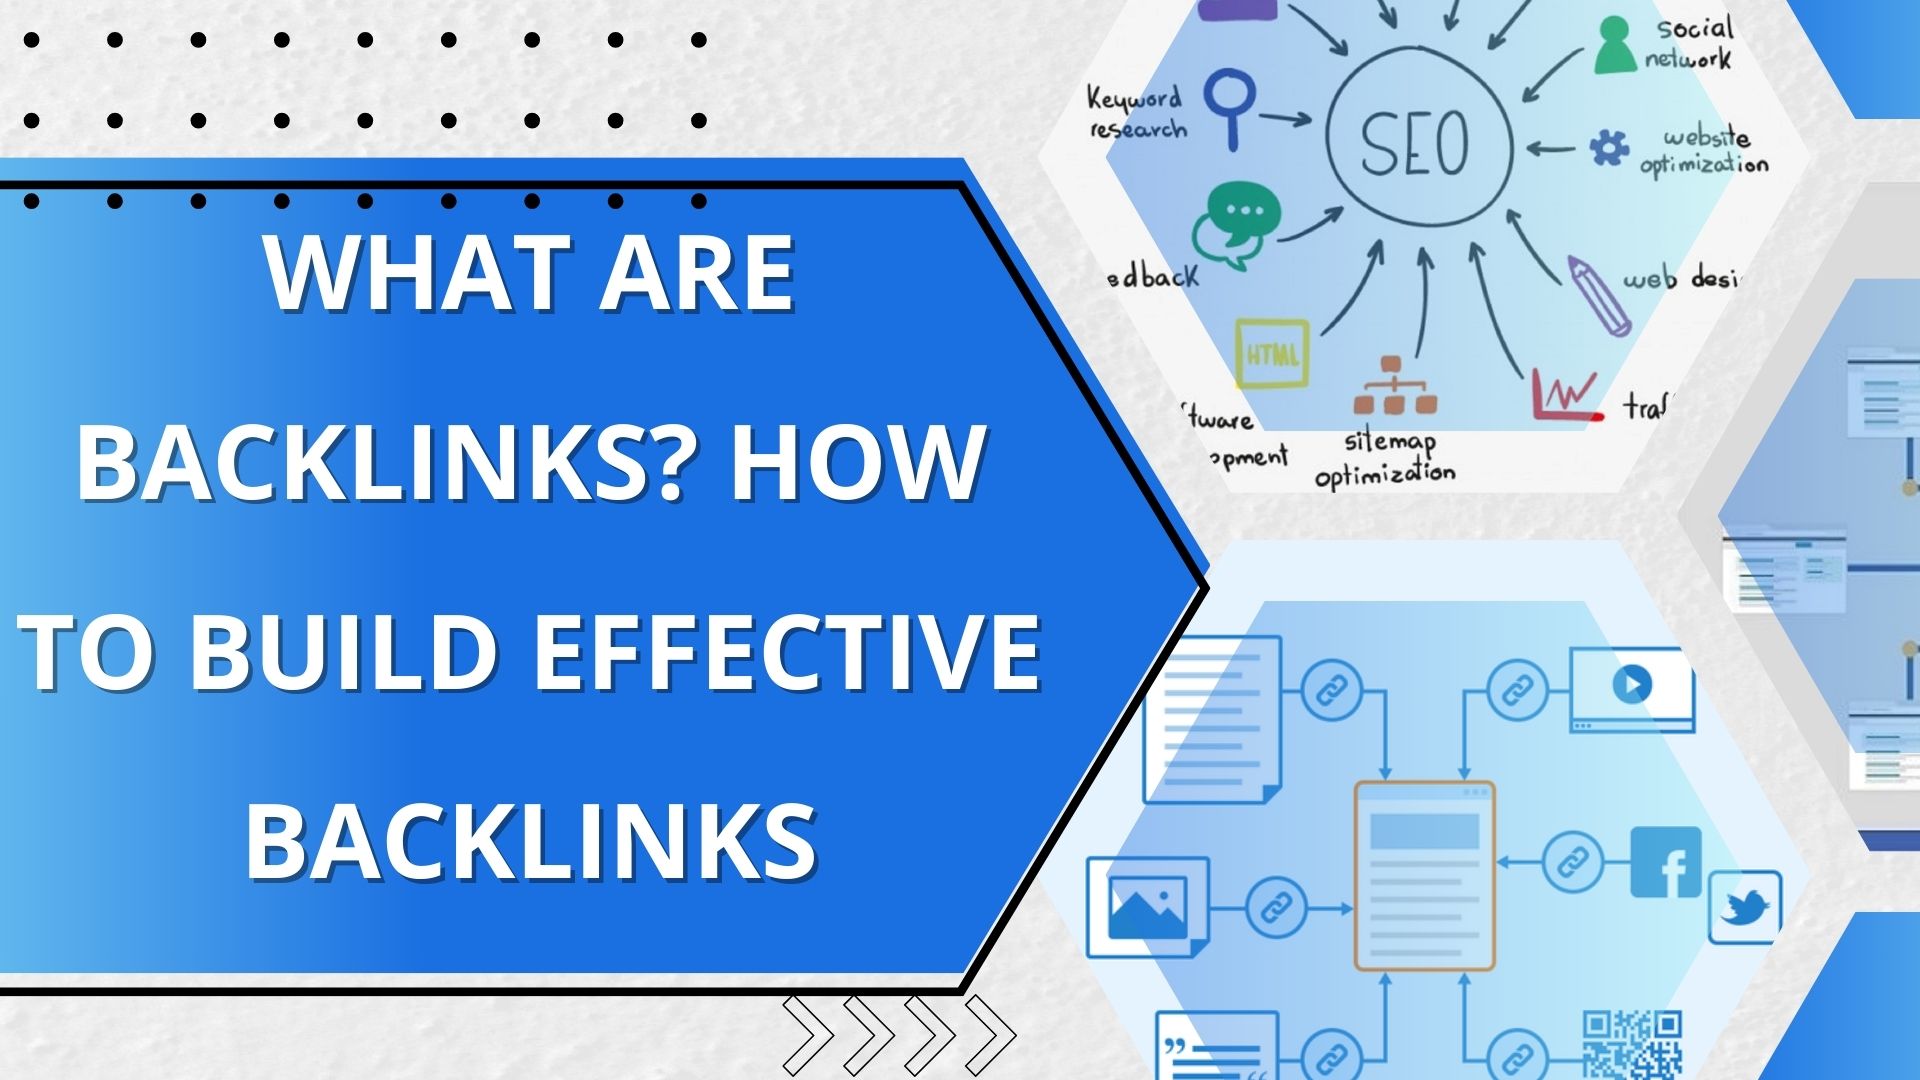 What are Backlinks? How to Build Effective Backlinks